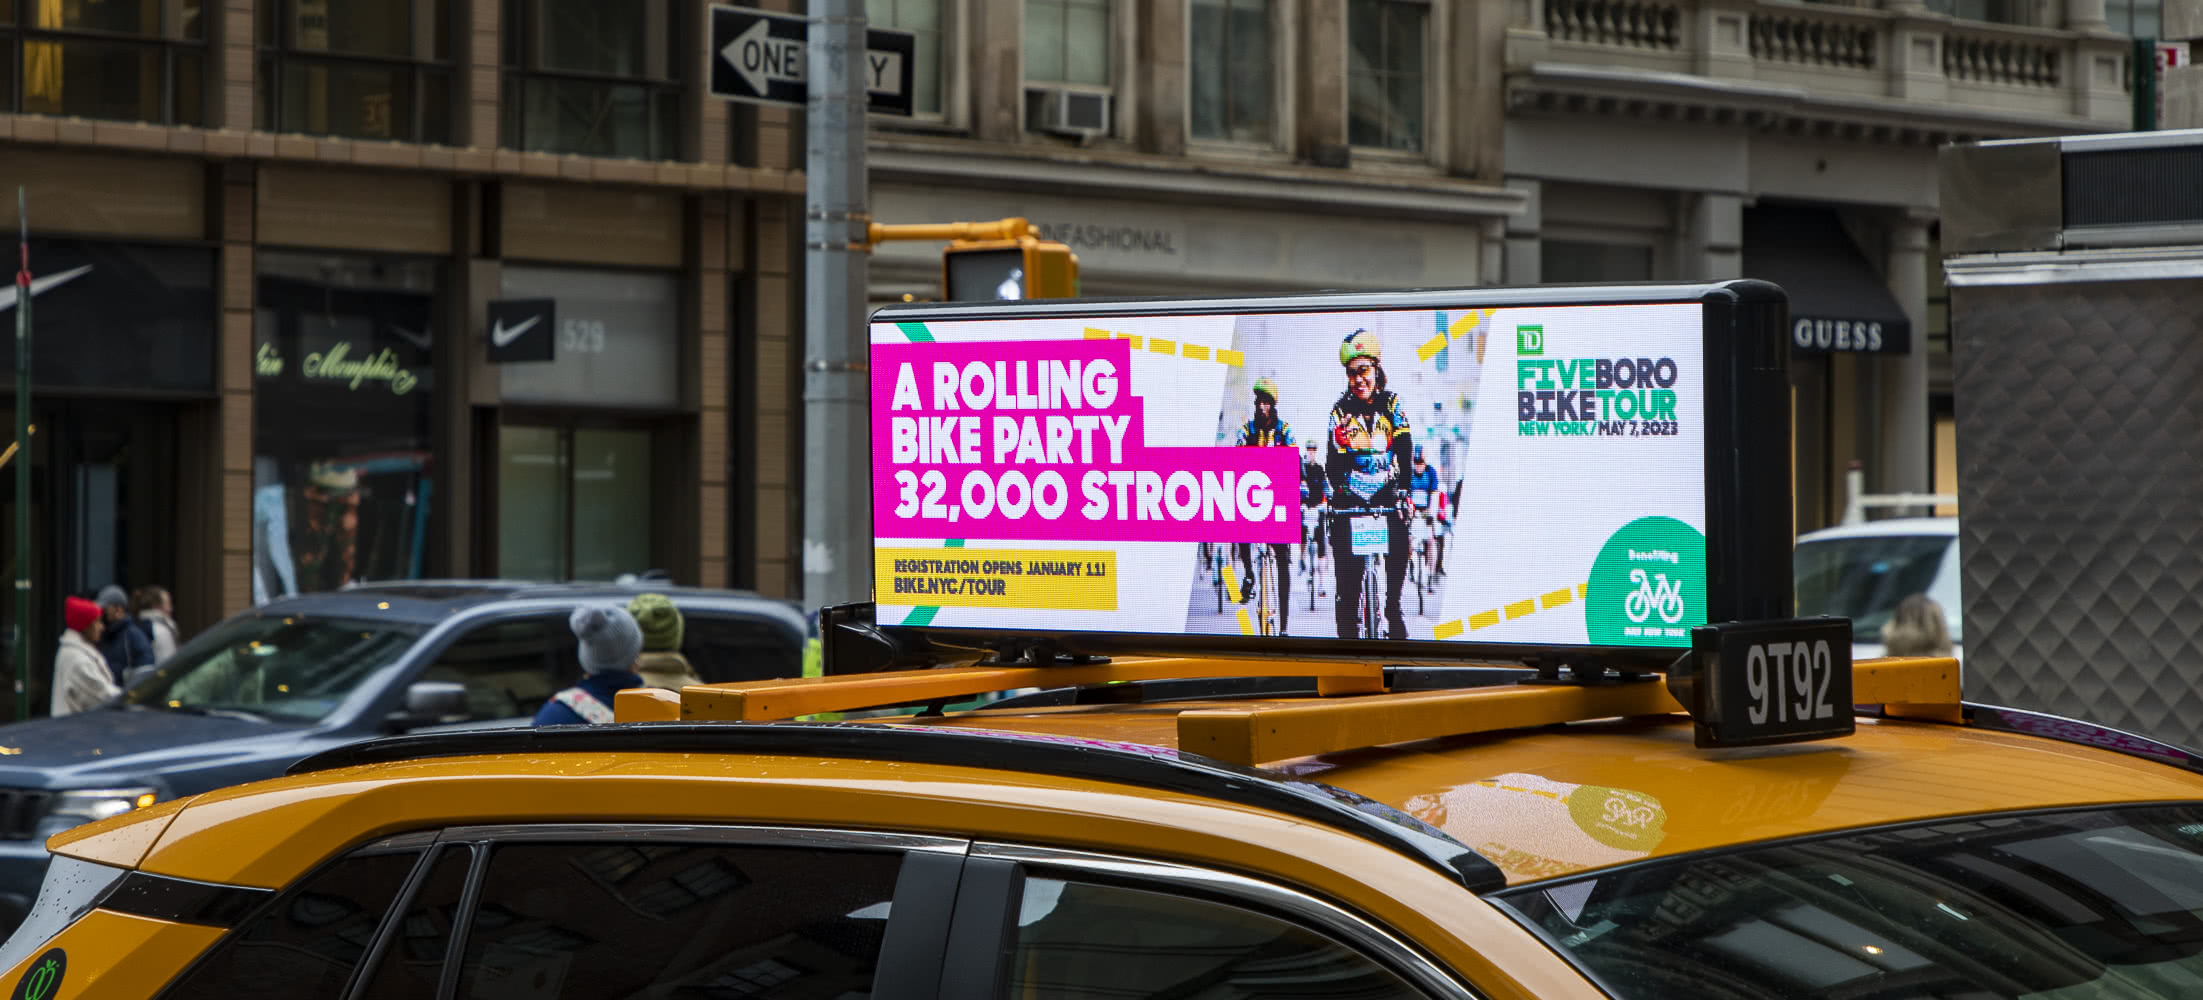 Taxi Ad: A Rolling Bike Party 32,000 Strong. Registration opens January 11! BIKE.NYC/TOUR
TD logo
FIVE BORO BIKE TOUR
NEW YORK/ MAY 7, 2023